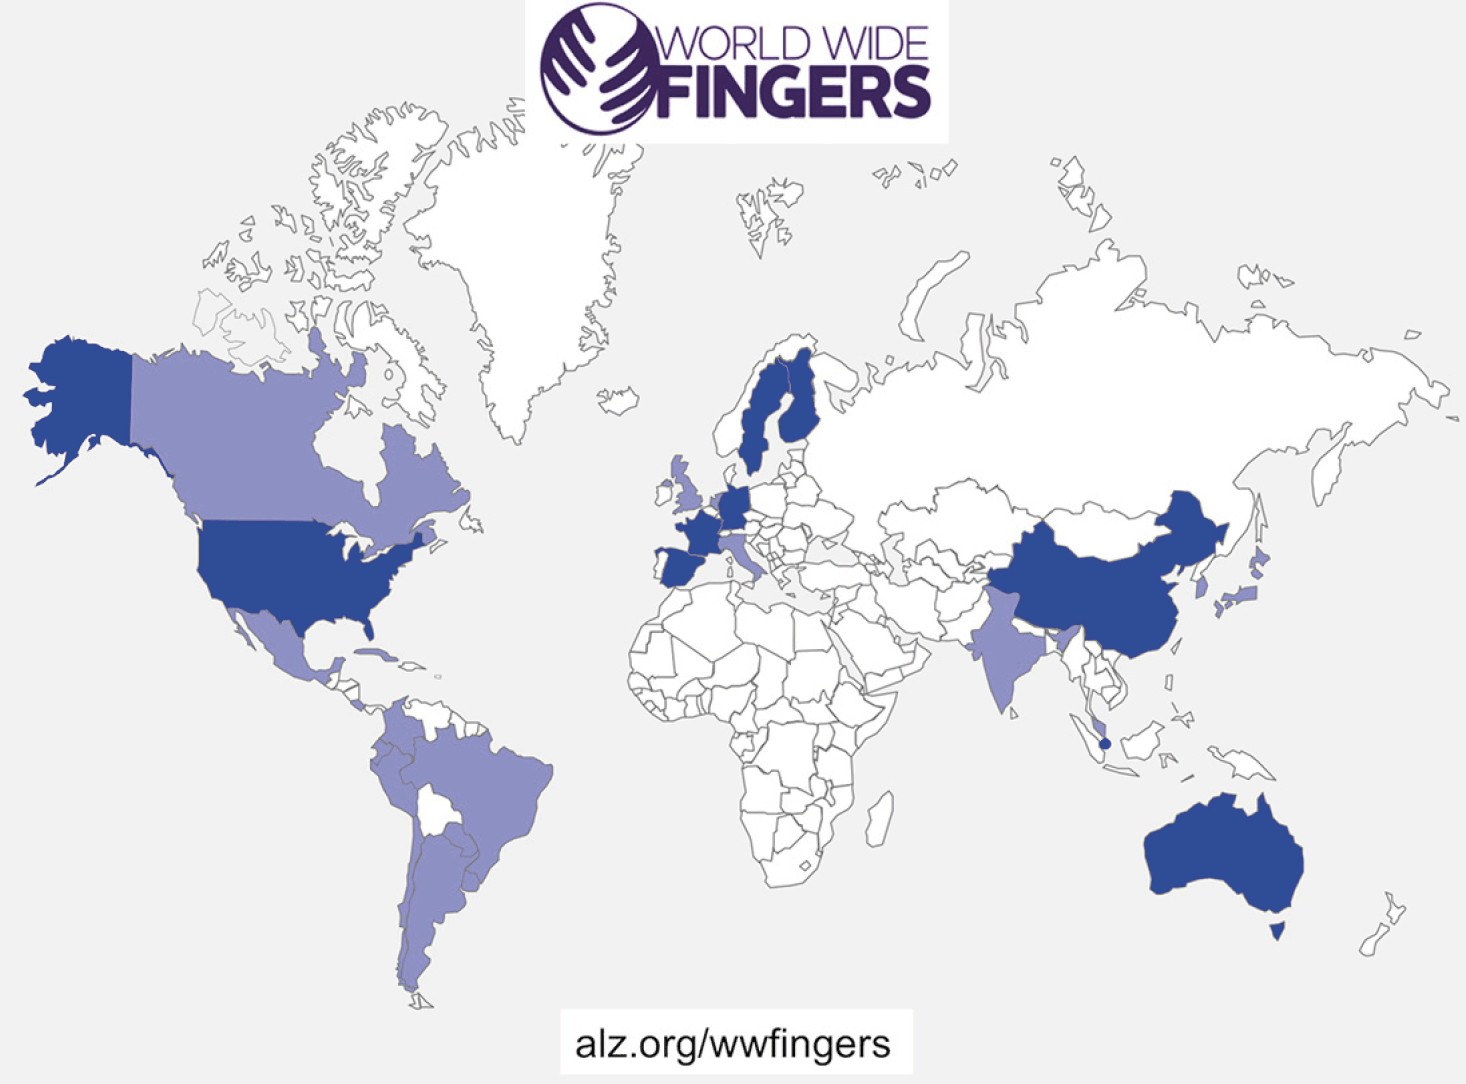 Figure 1. World map with countries which are involved in the WW-FINGERS network. Blue indicates involvement in ongoing WW-FINGERS studies. Studies are currently planned in countries marked with purple